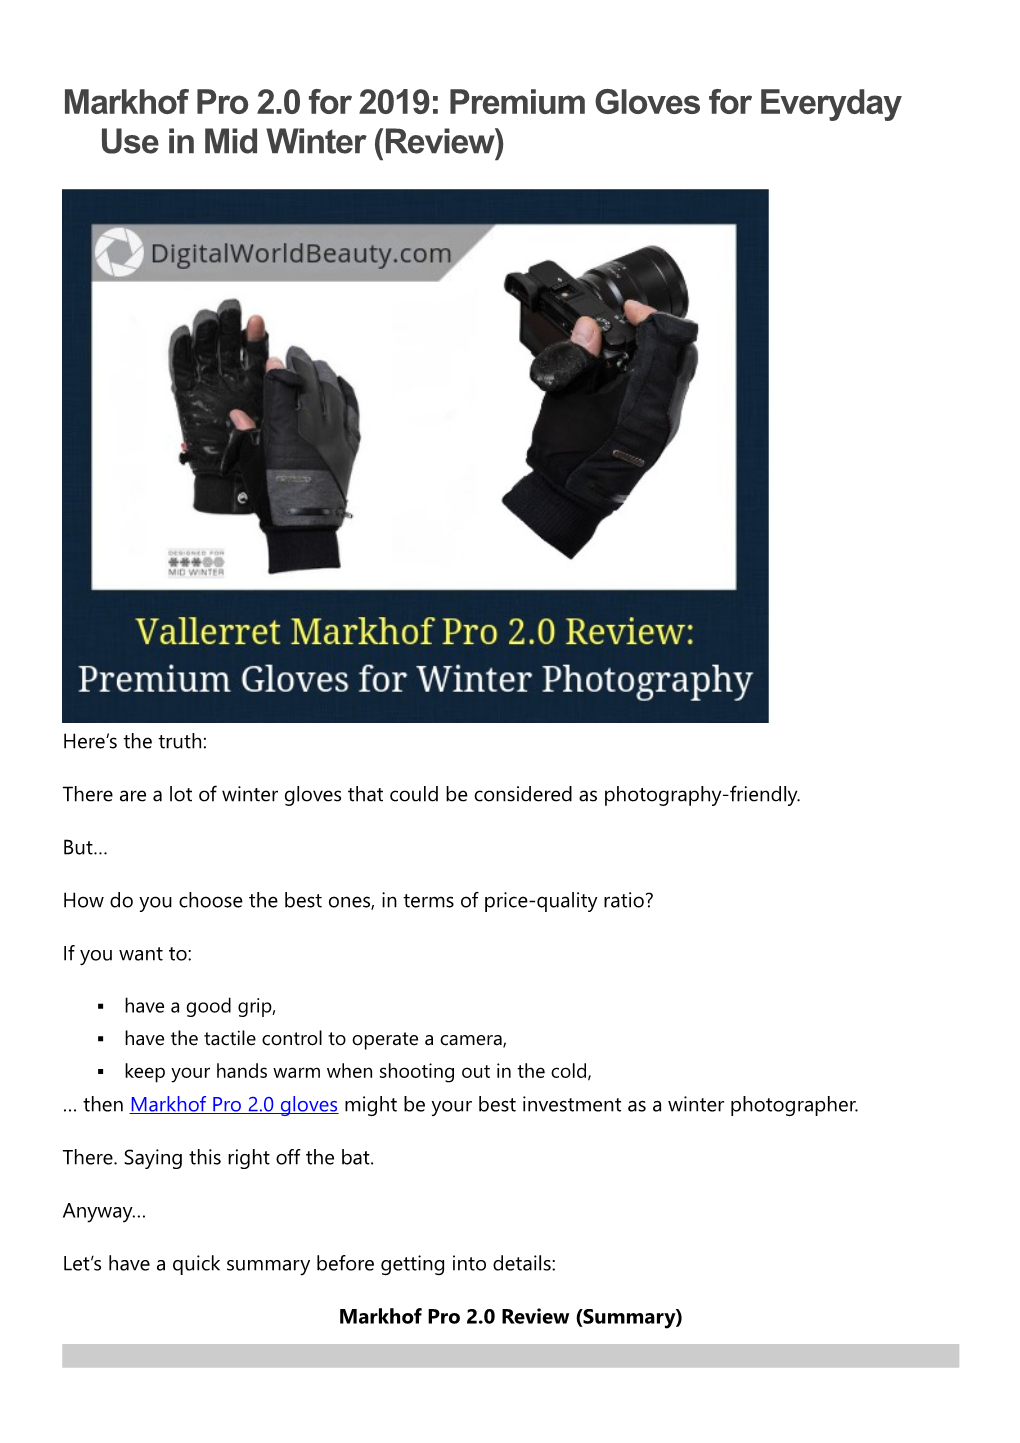 Markhof Pro 2.0 for 2019: Premium Gloves for Everyday Use in Mid Winter (Review)